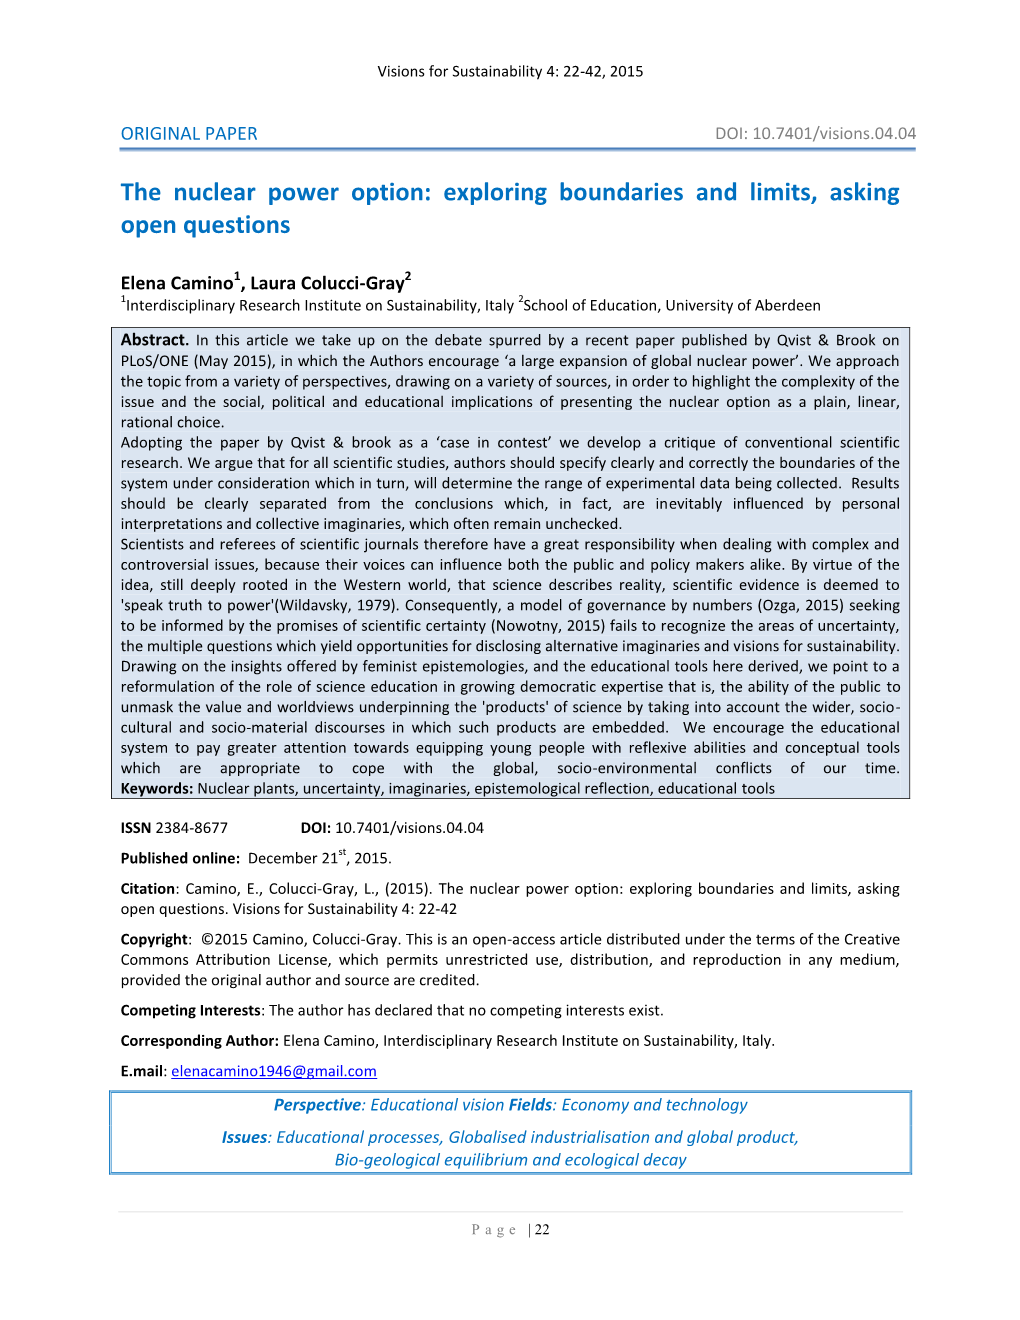 The Nuclear Power Option: Exploring Boundaries and Limits, Asking Open Questions